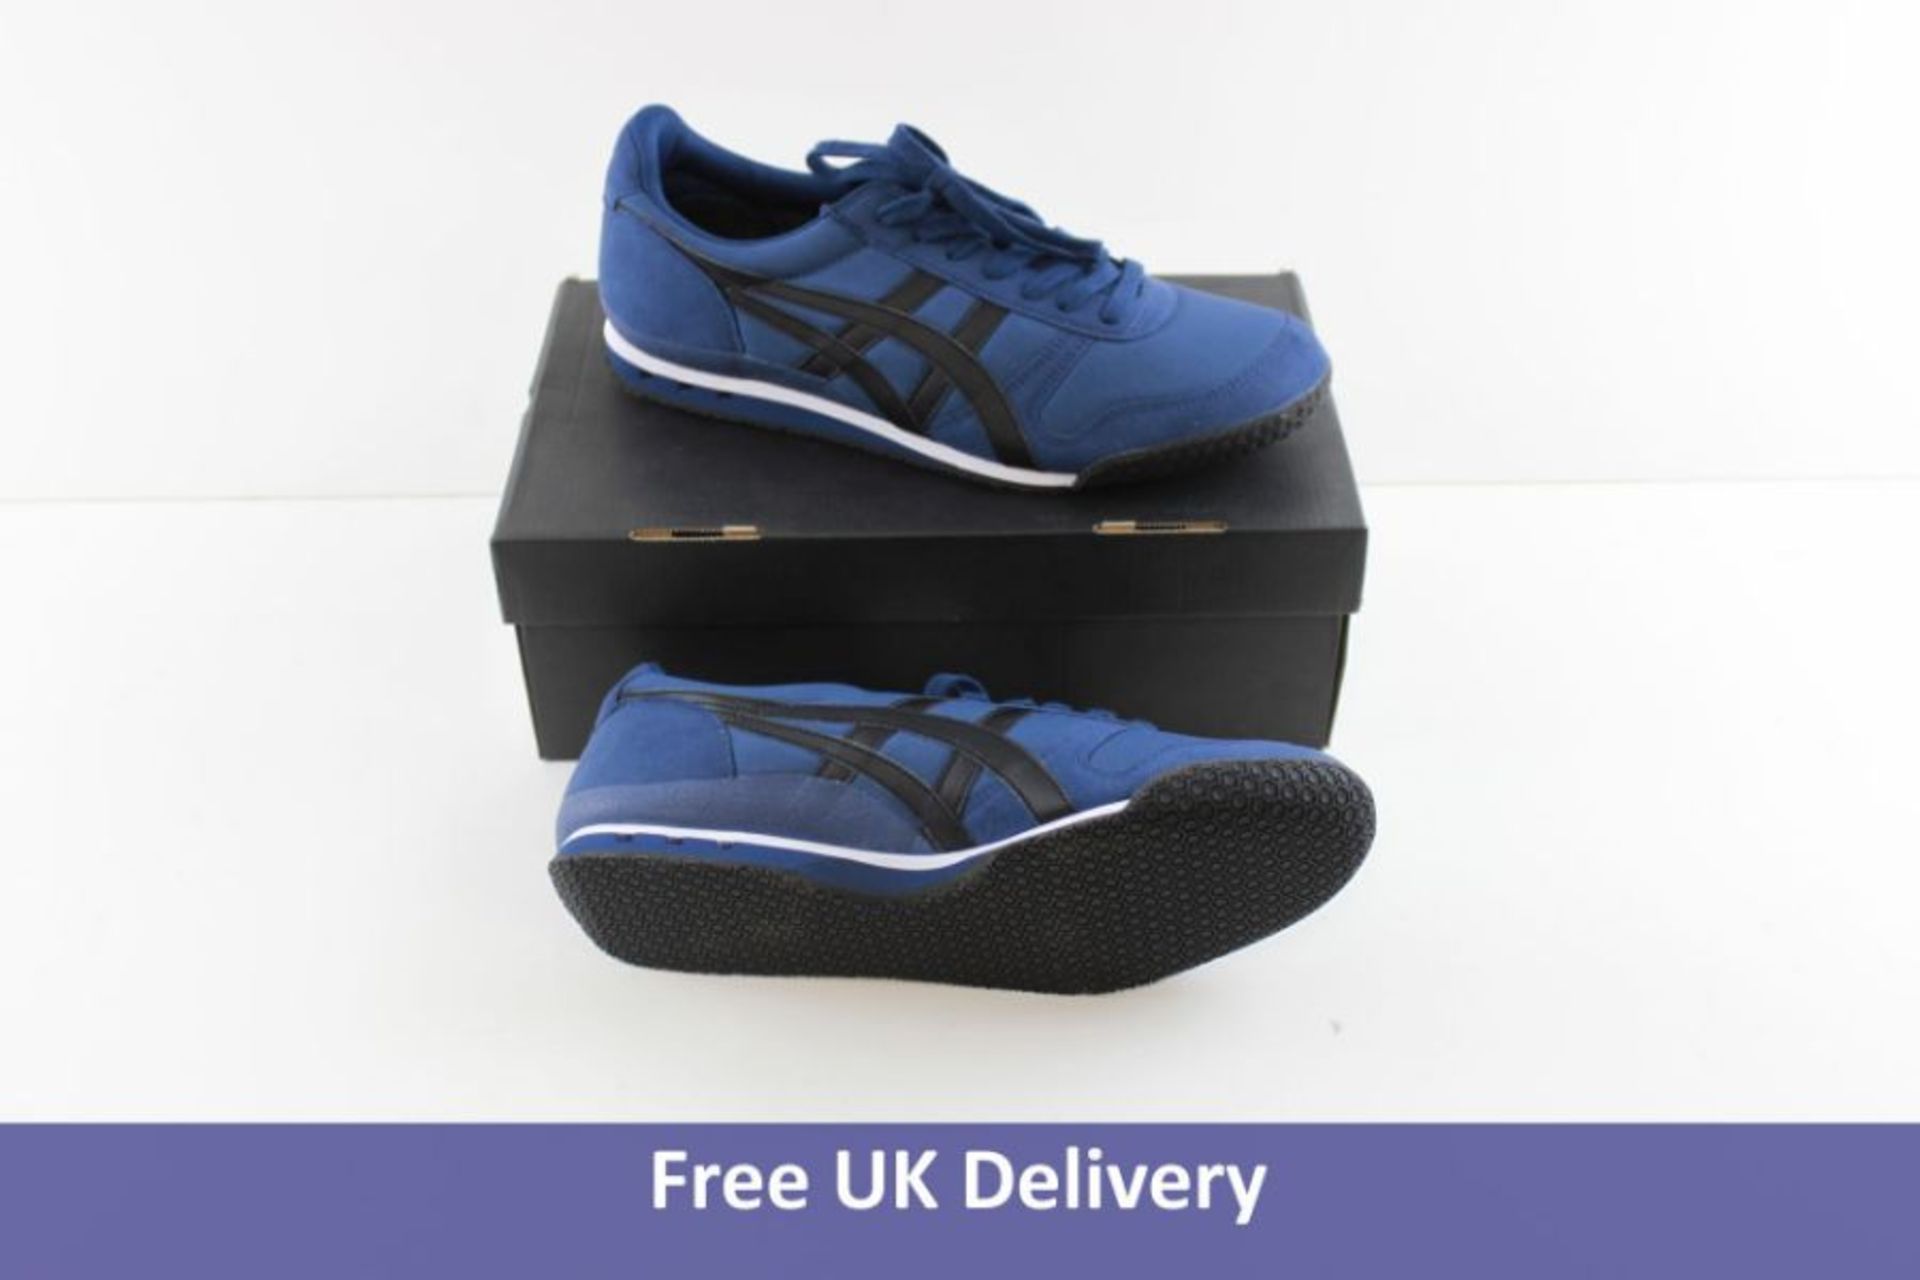 Onitsuka Tiger Men's Ultimate 81 Trainers, Midnight Blue and Black, UK 10